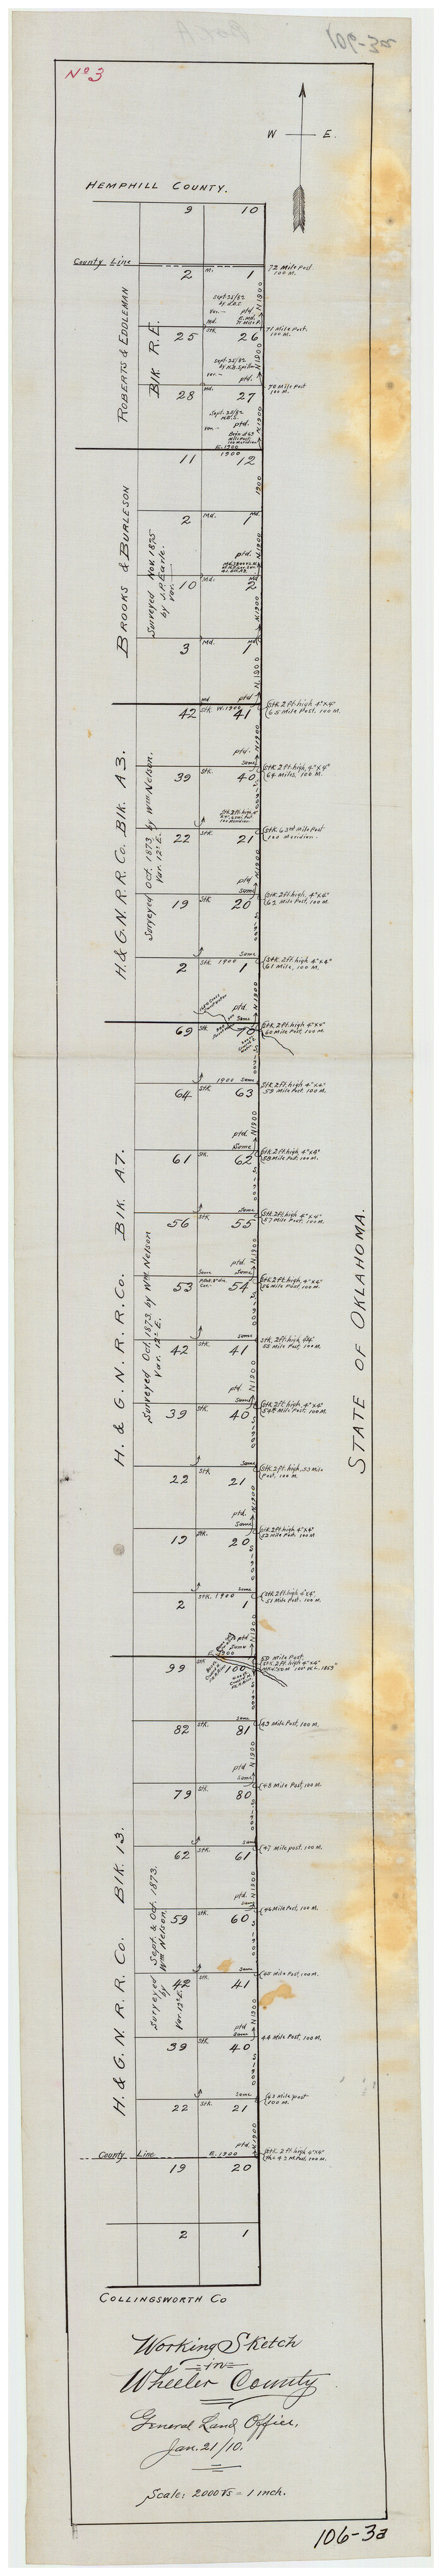 90731, Working Sketch in Wheeler County, Twichell Survey Records